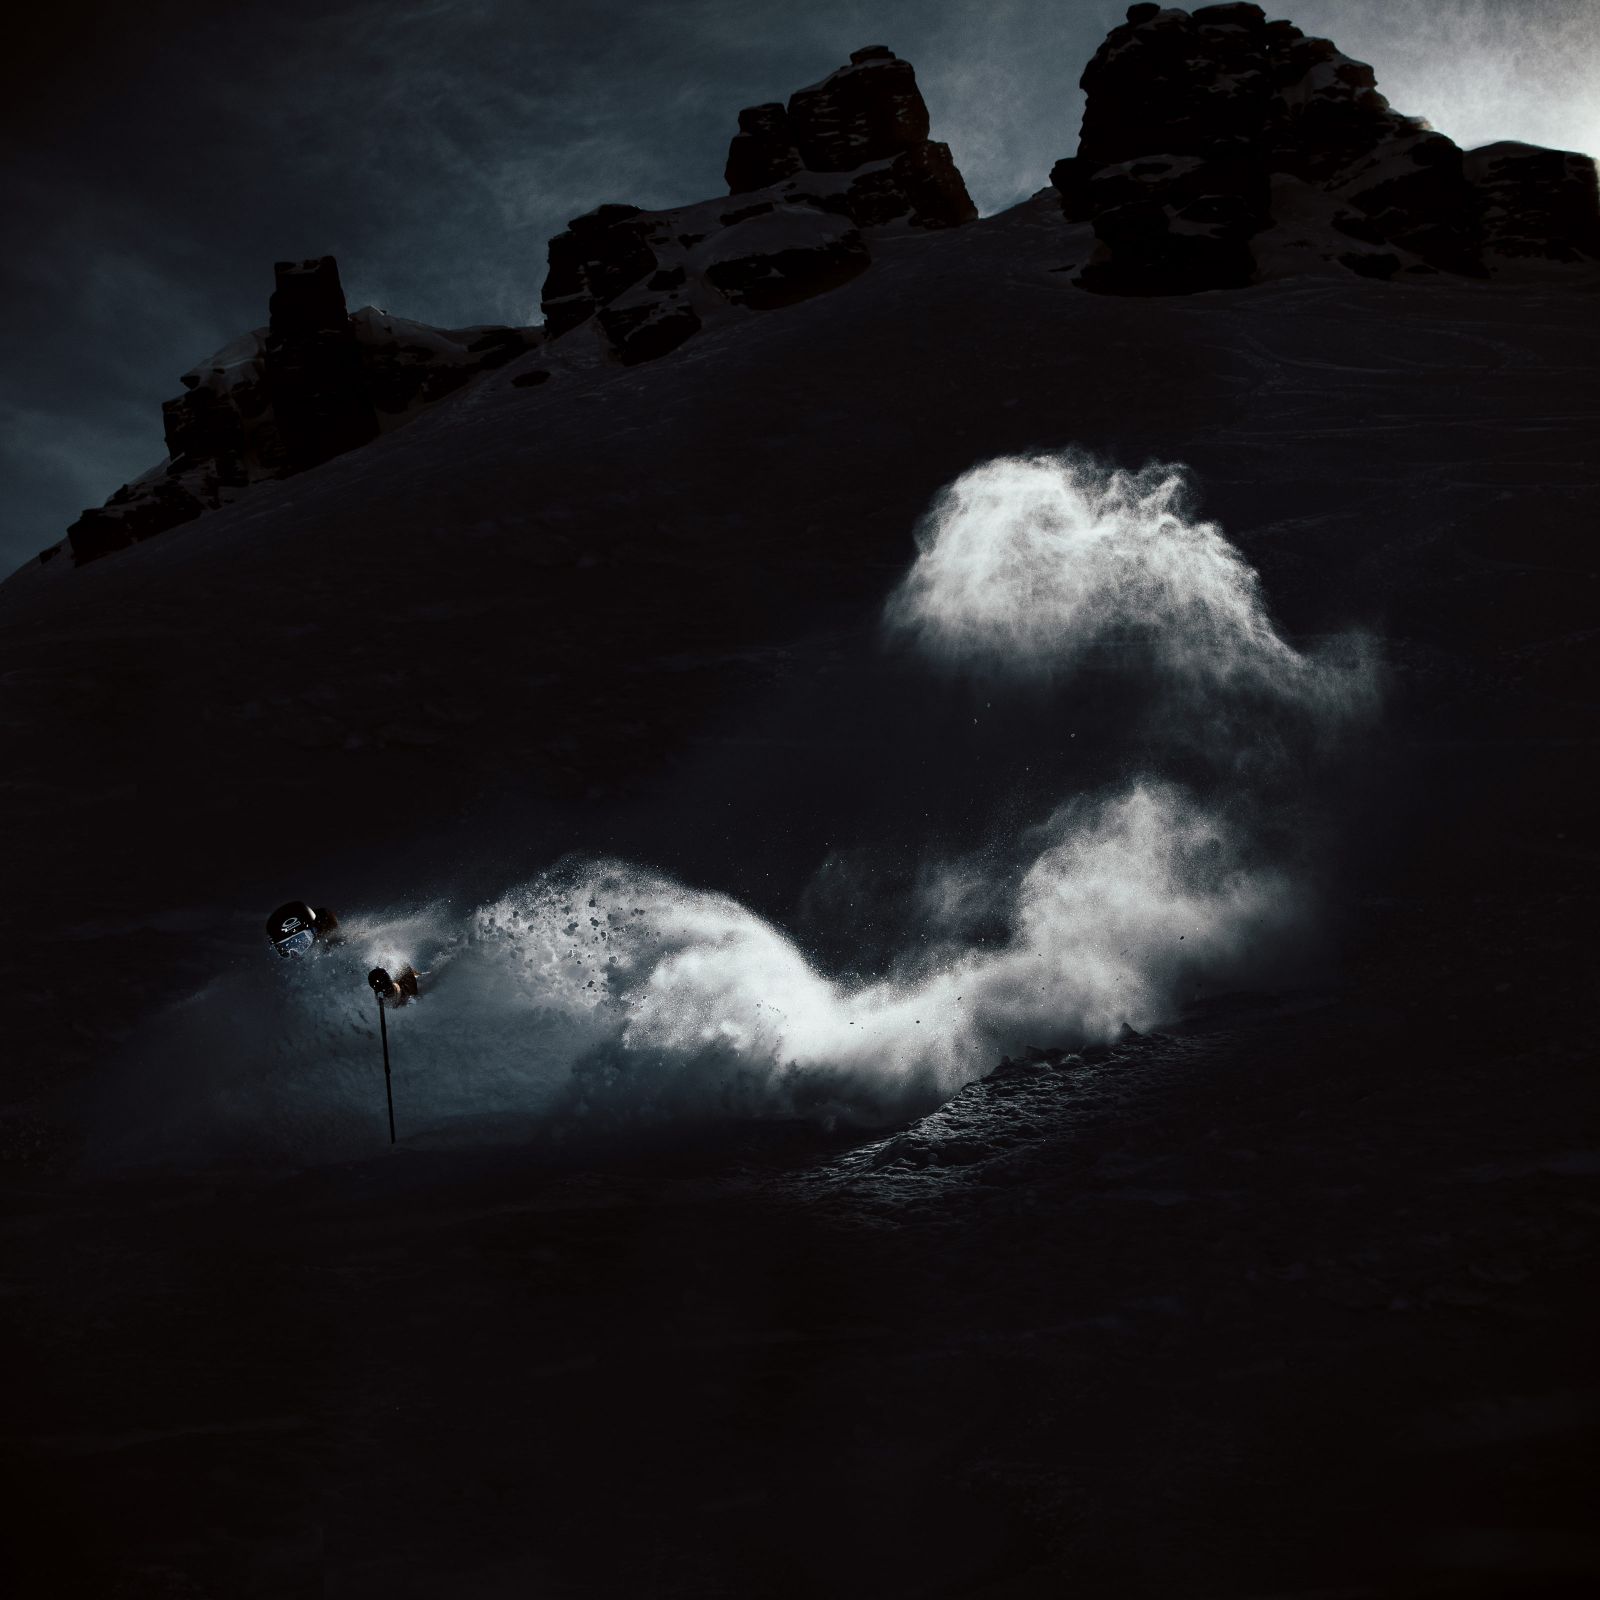 A cliff face with a skier going downhill with a cloud of snow following down the hill.